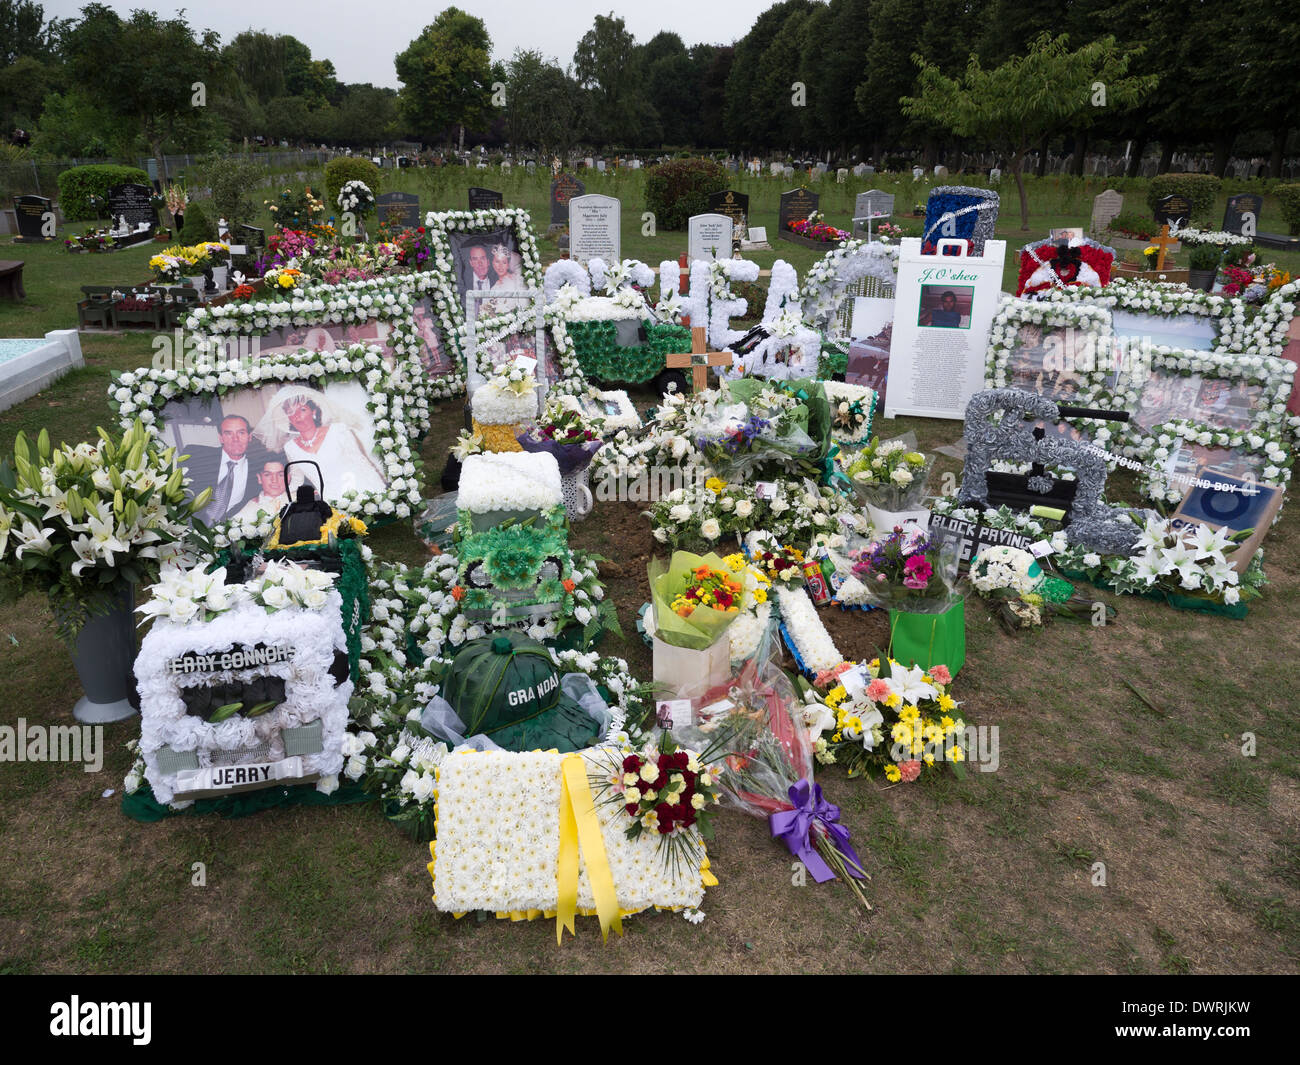 Extravagant displays of flowers at a cemetery in London Stock Photo